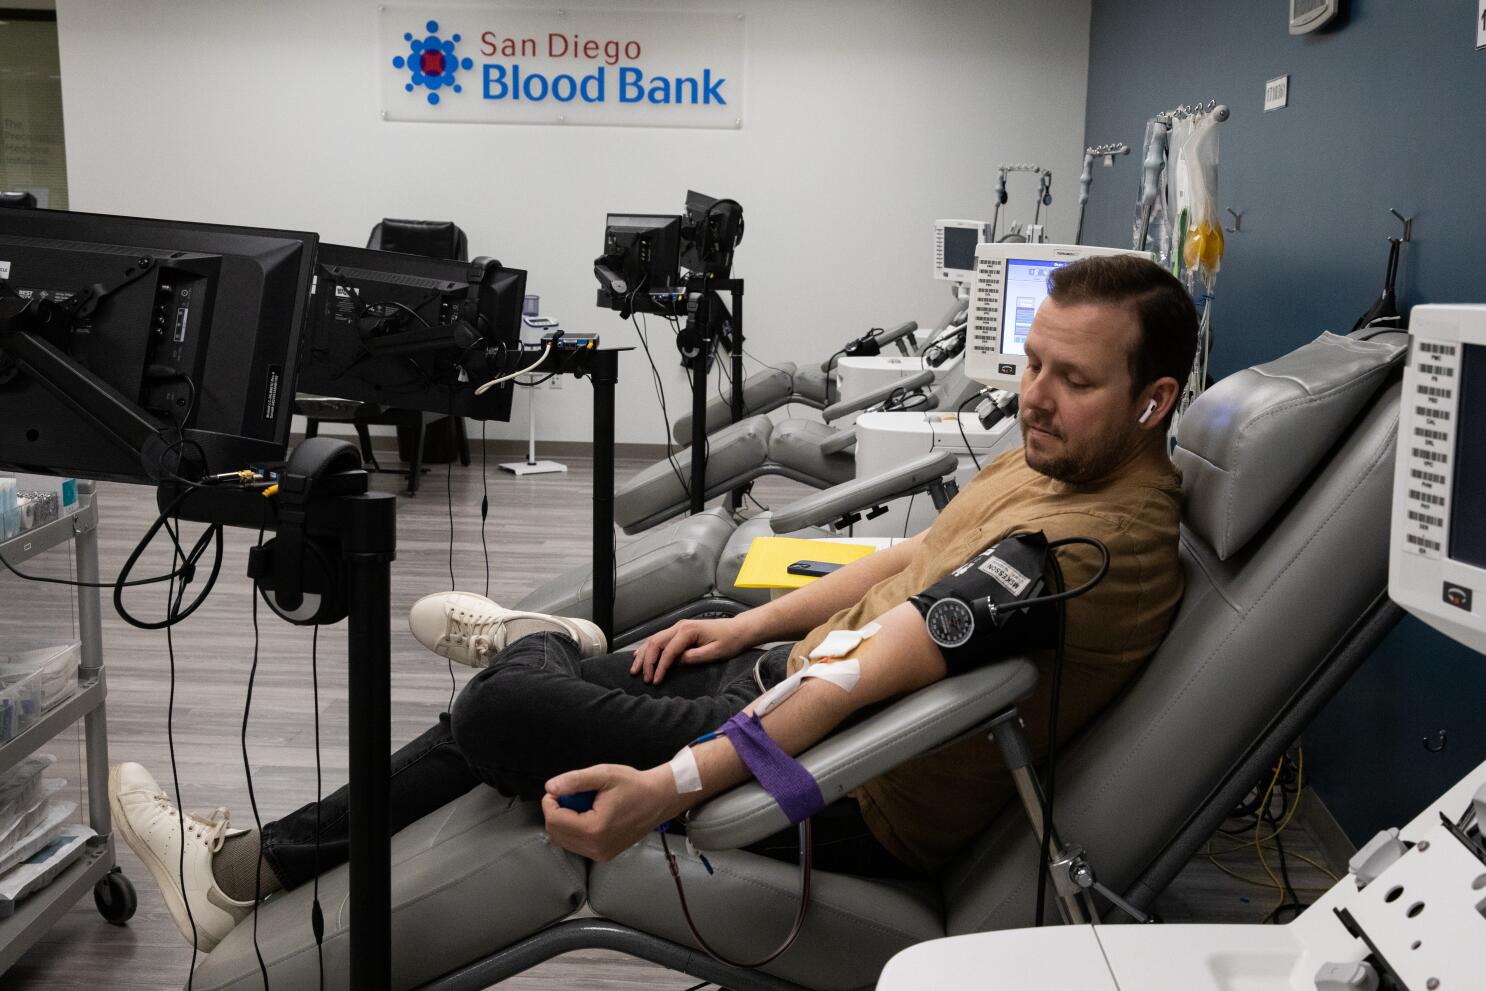 All The News That's Fit: Clowning around, blood donations and diet soda -  The San Diego Union-Tribune